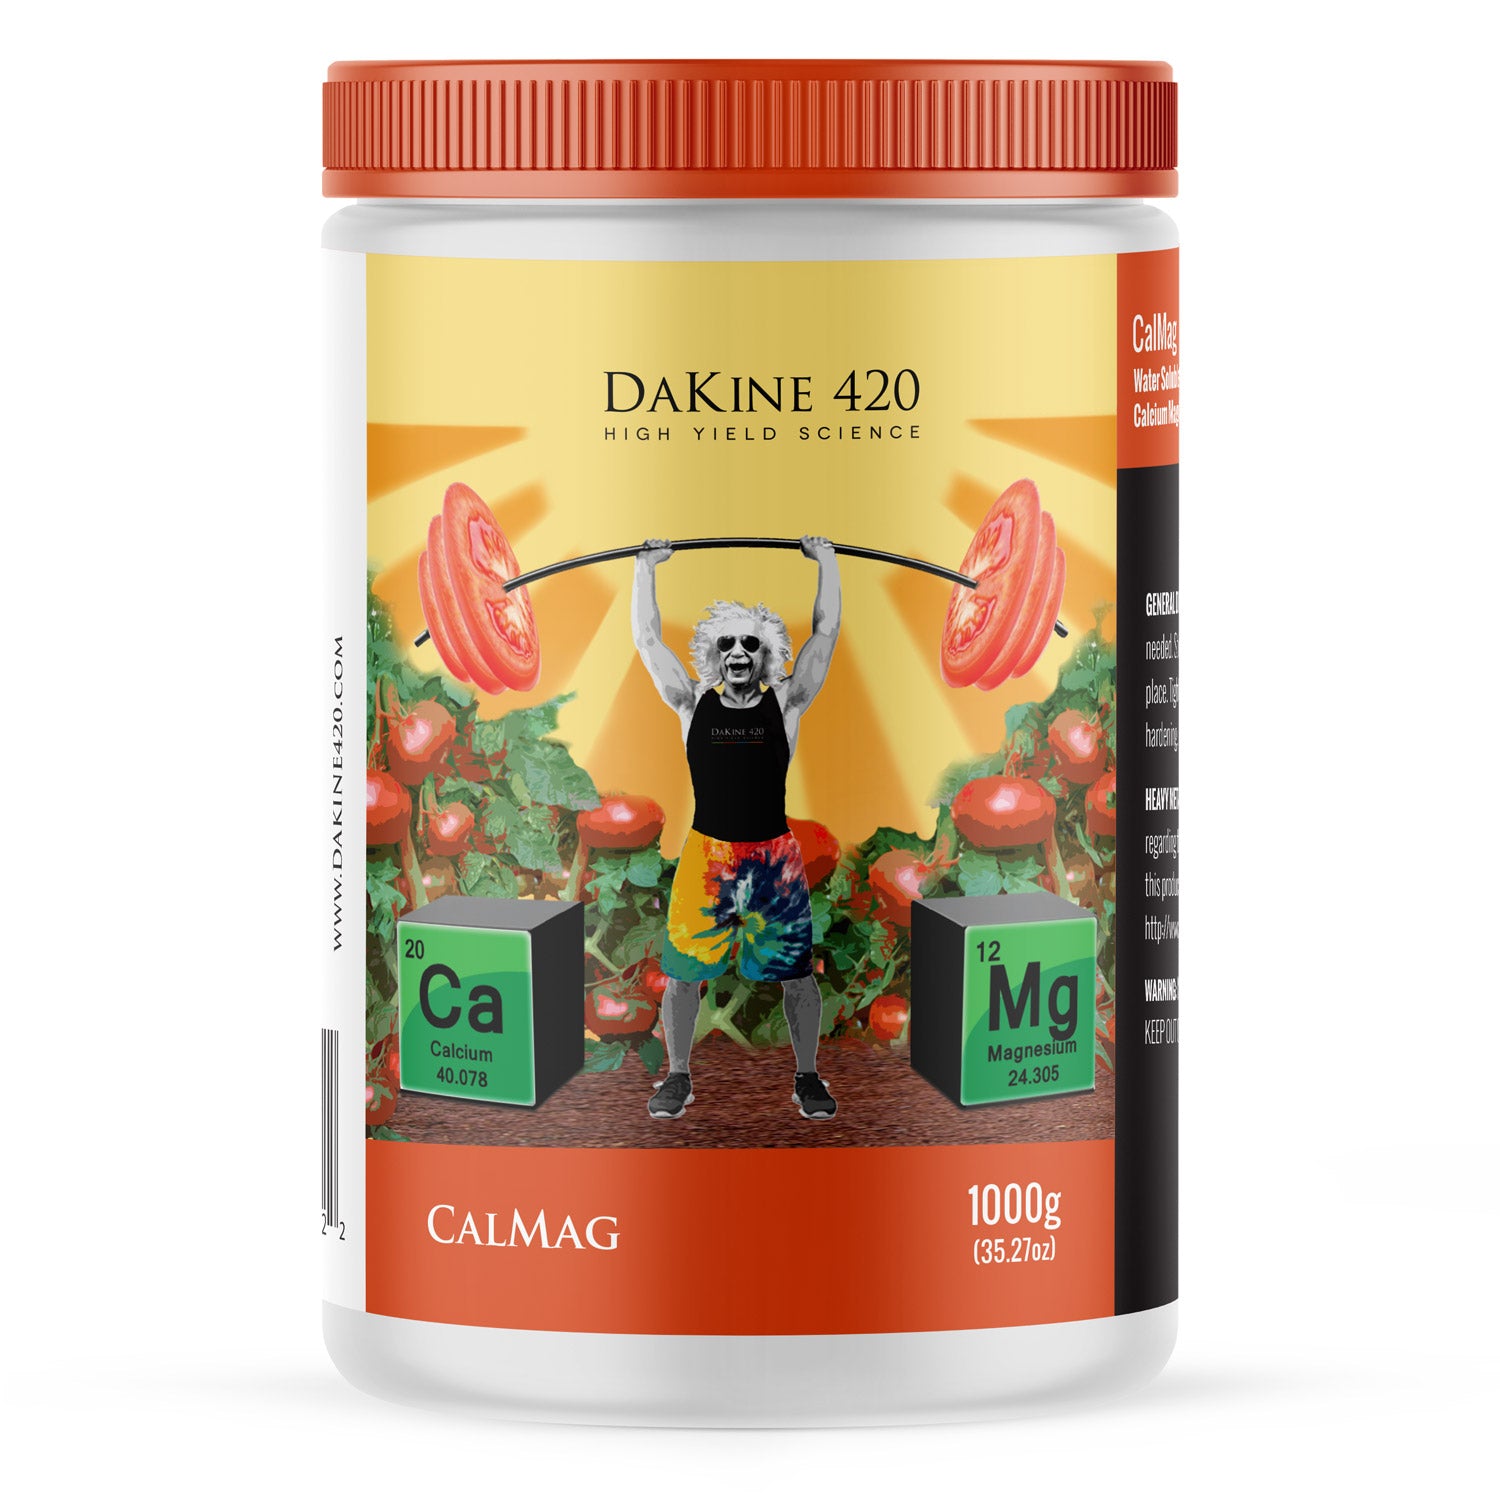 CalMag. It’s a delicious 12-2-12 product containing 6% Calcium and 3% Magnesium for consistently beneficial results.